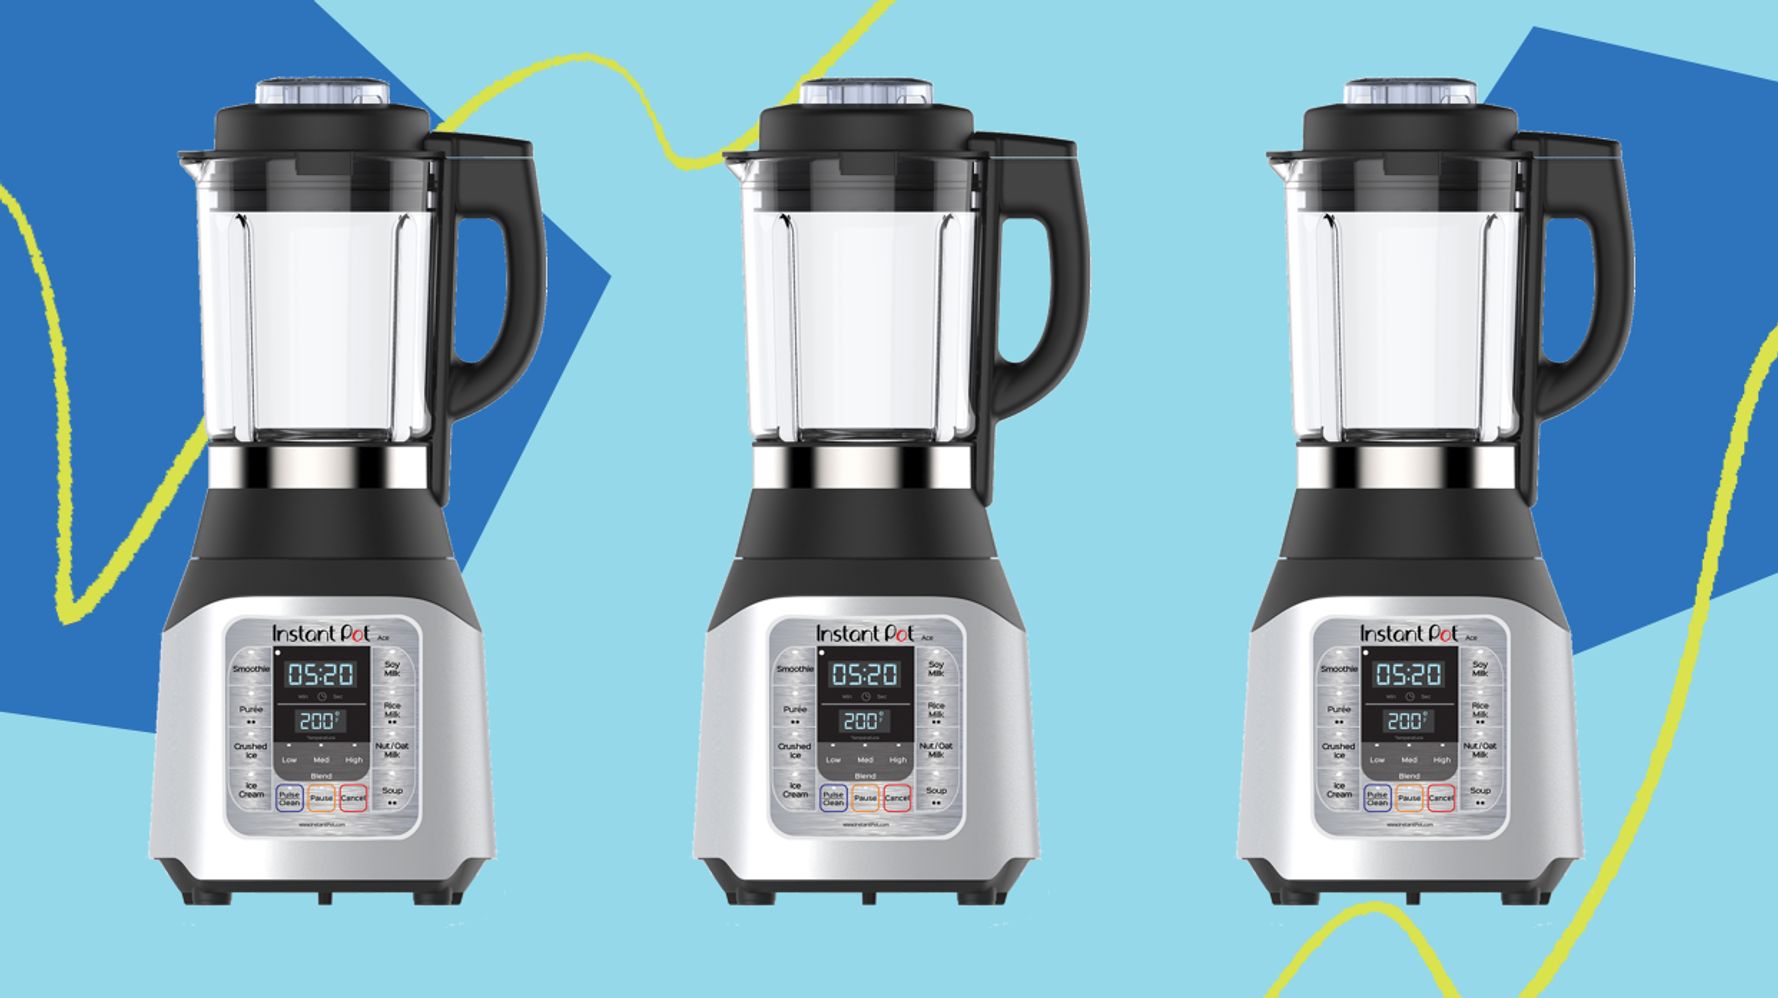 Get This Instant Pot Cooking Blender Deal While It's Hot (Or Cold)